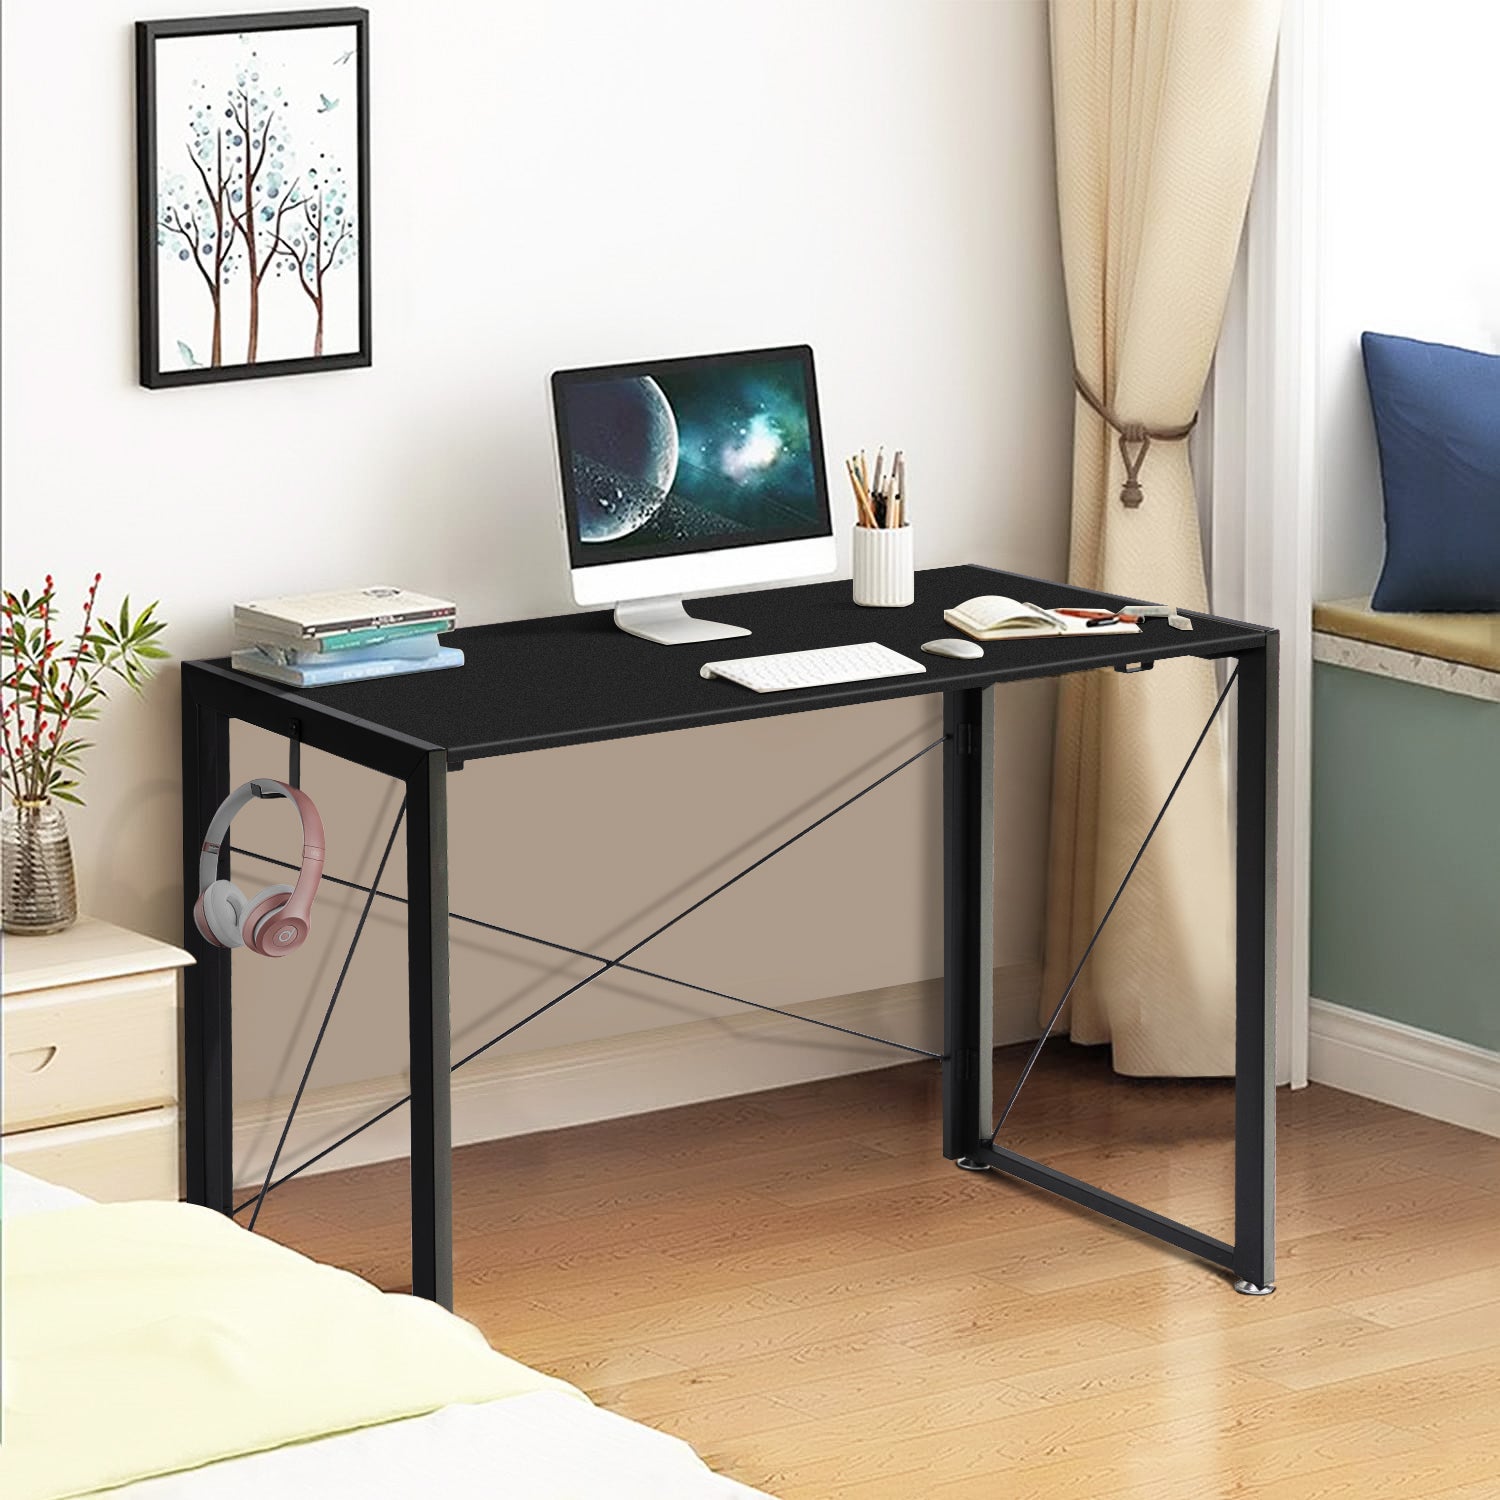 YAMASORO Writing Computer Desk 40" Modern Simple Study Folding Desk Industrial Style Laptop Table for Small Home Office, Foldable Corner Writing Table Gaming Desk Black Frame, Rustic Brown